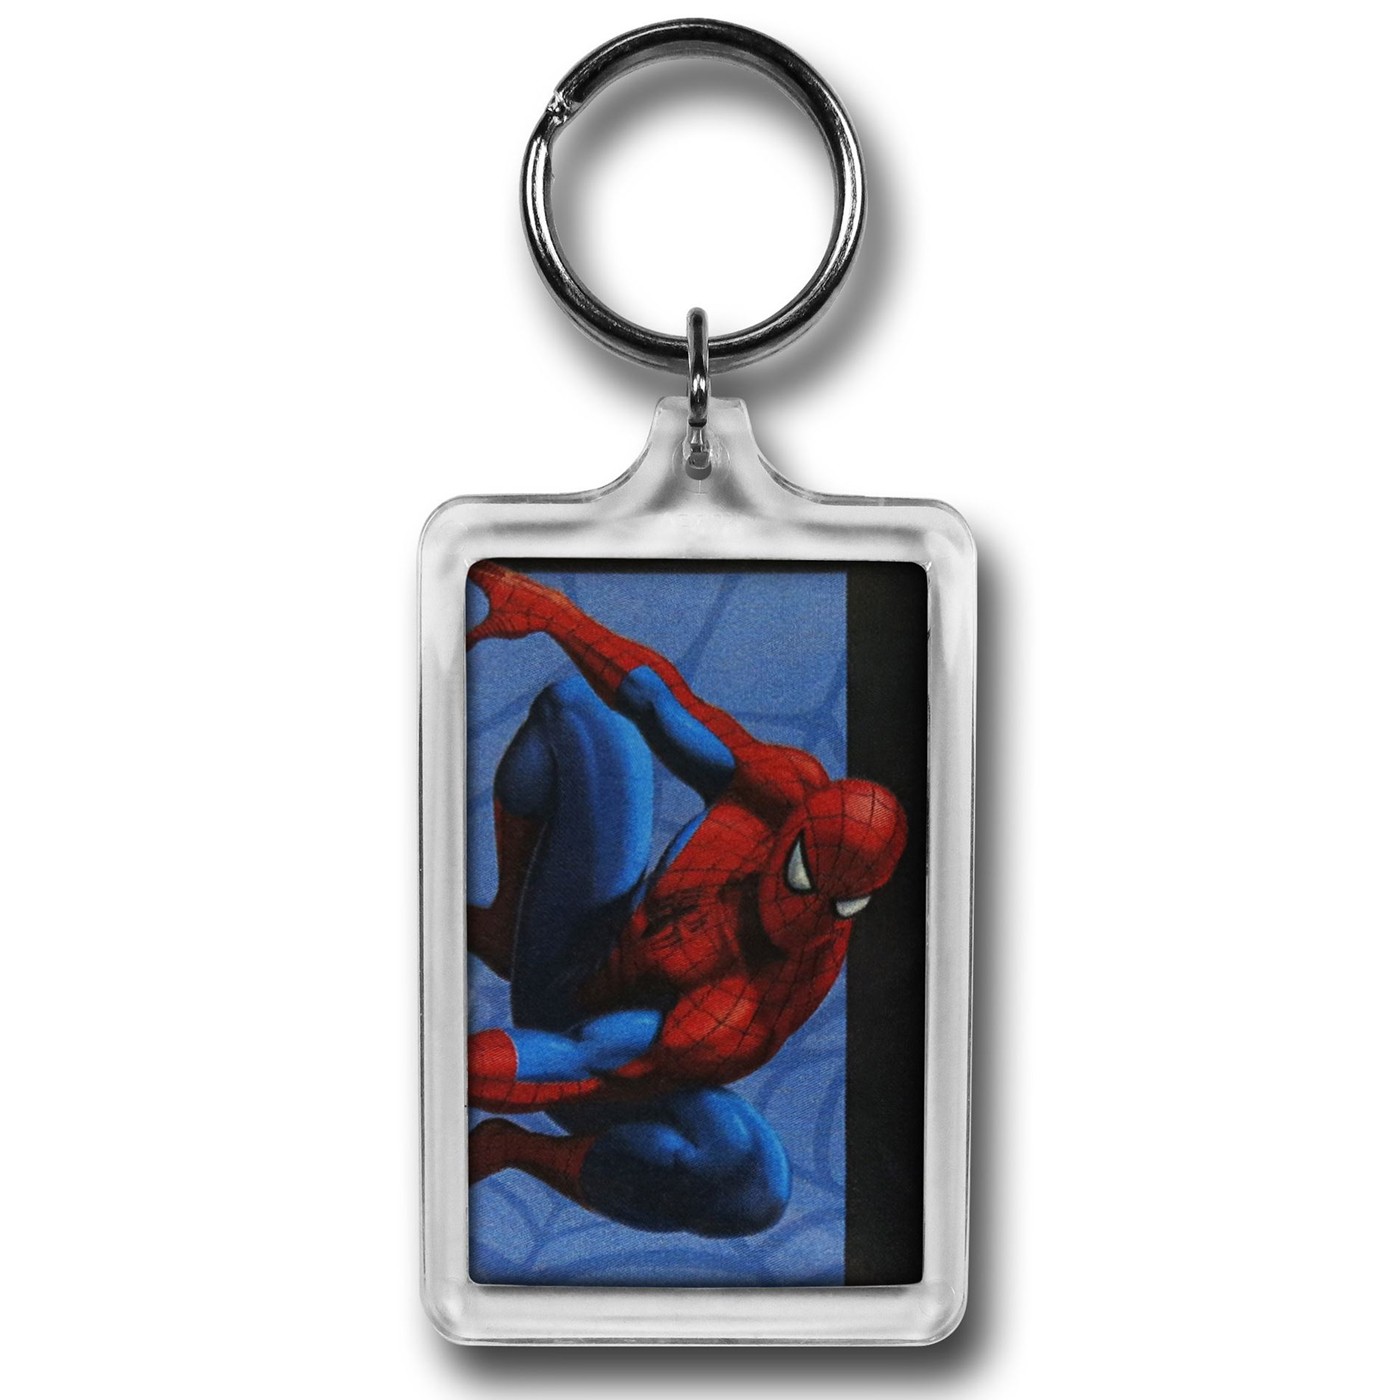 Spiderman Clinging to Wall Lucite Keychain